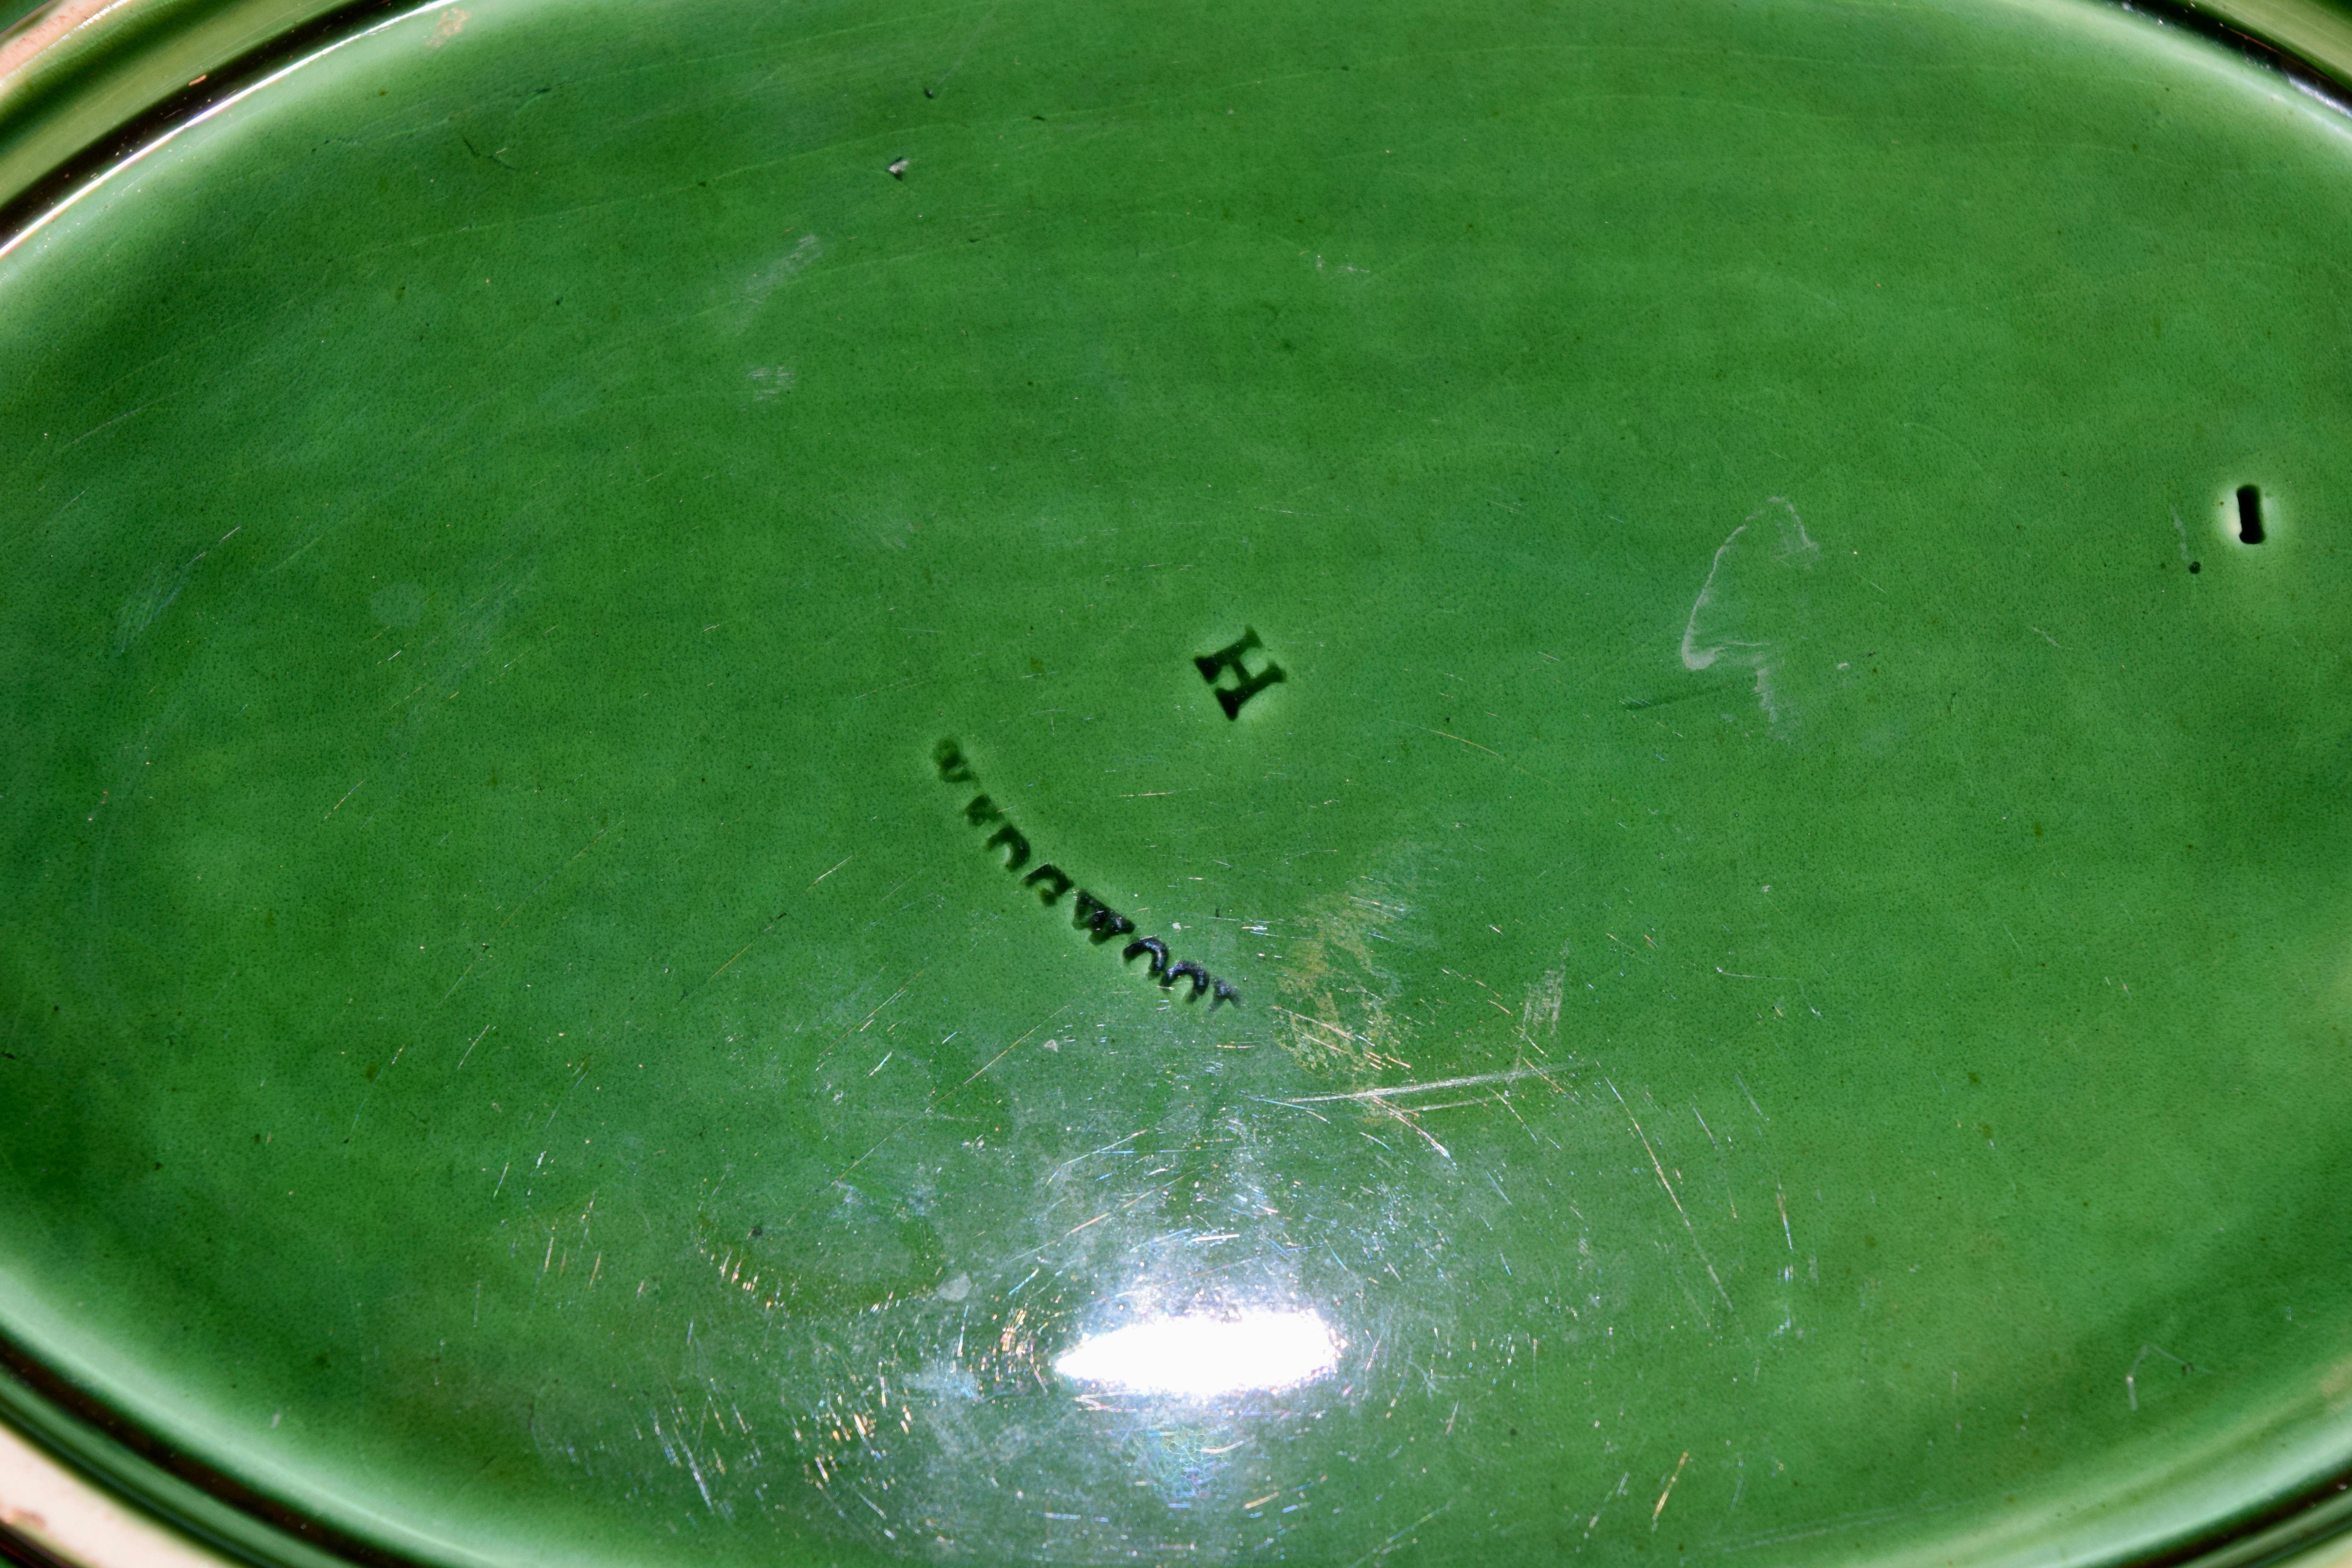 Victorian 19th Century Wedgwood Majolica Dish For Sale